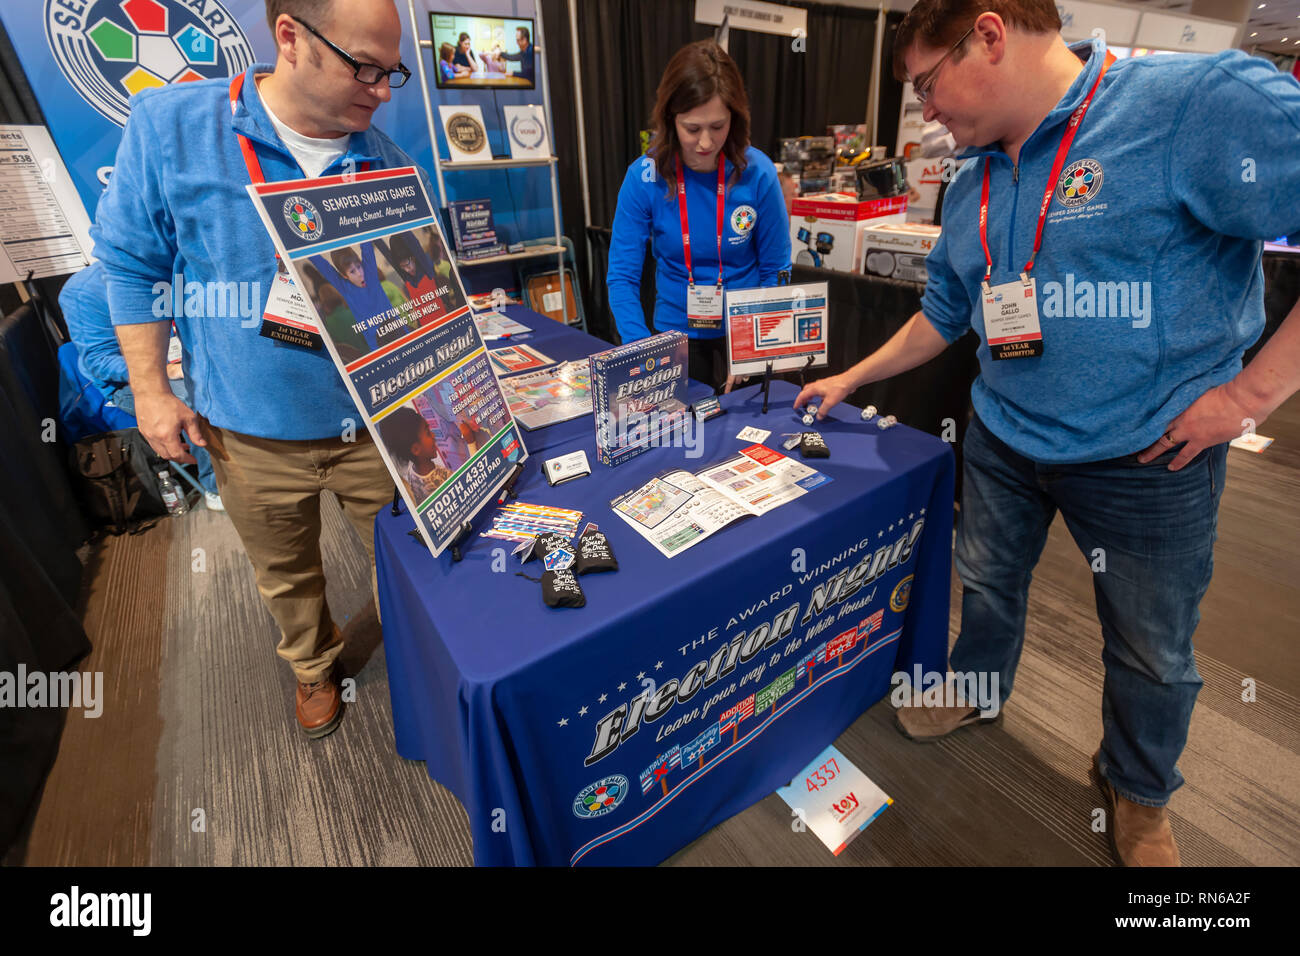 New York, USA. 17th Feb, 2019. Founder Jim Moran, right, with other booth workers neatens up their 'Election Night' game display at the 116th North American International Toy Fair in the Jacob Javits Convention center in New York on Sunday, February 17, 2019. Semper Smart Games creates math oriented games. 'ElectionNight' teaches children about the Electoral College' and the math of winning an election. ( © Richard B. Levine) Credit: Richard Levine/Alamy Live News Stock Photo